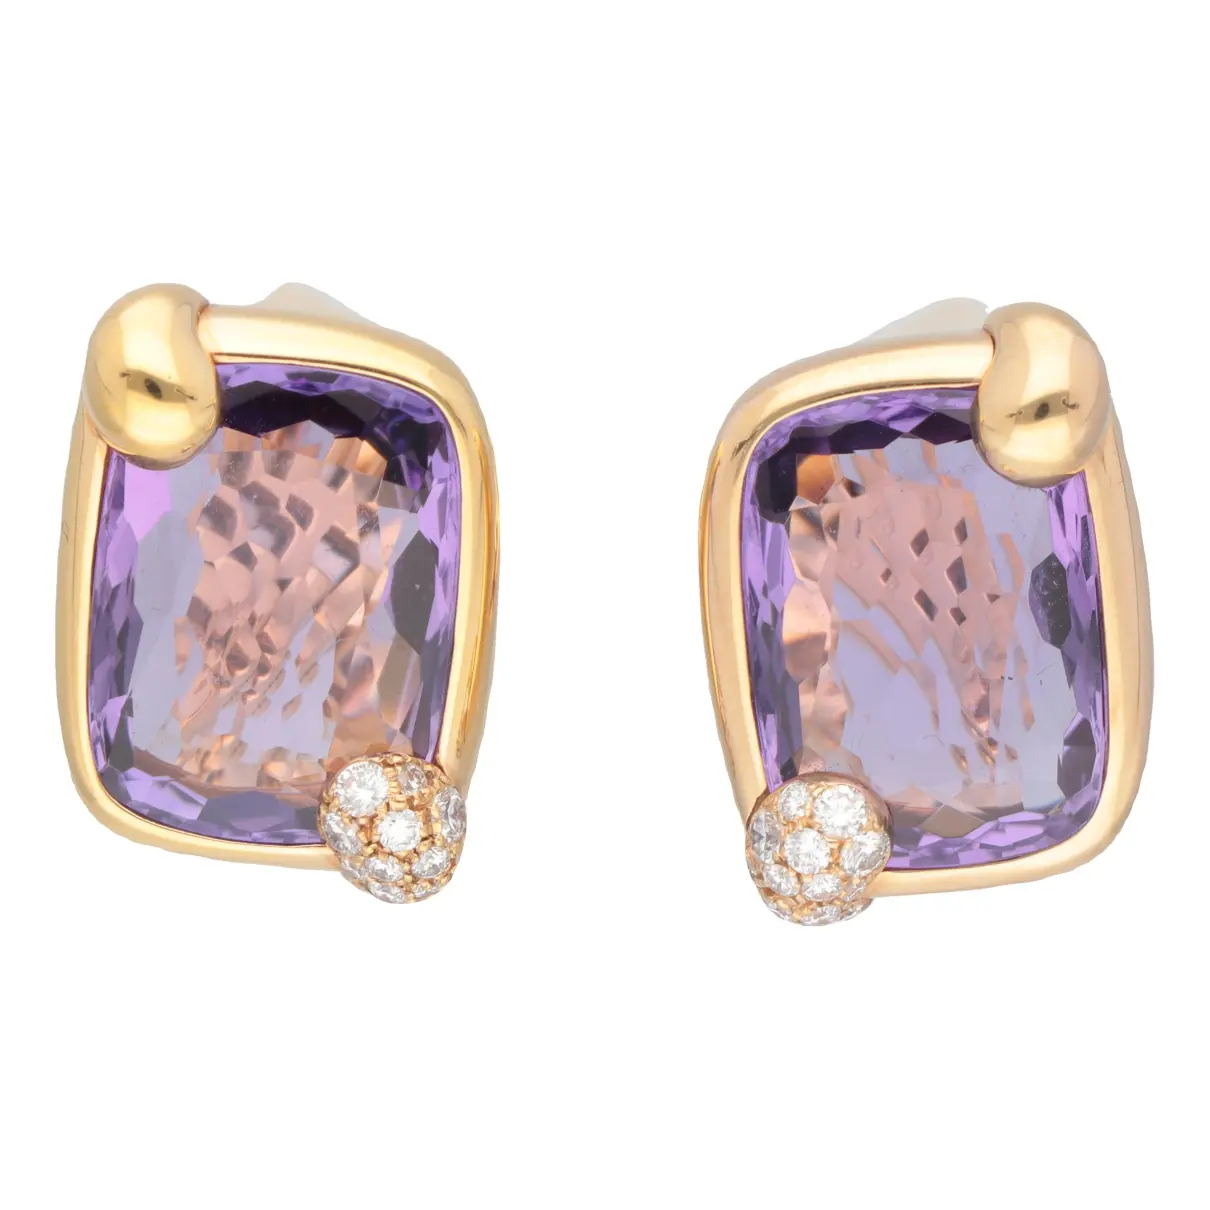 Ritratto pink gold earrings